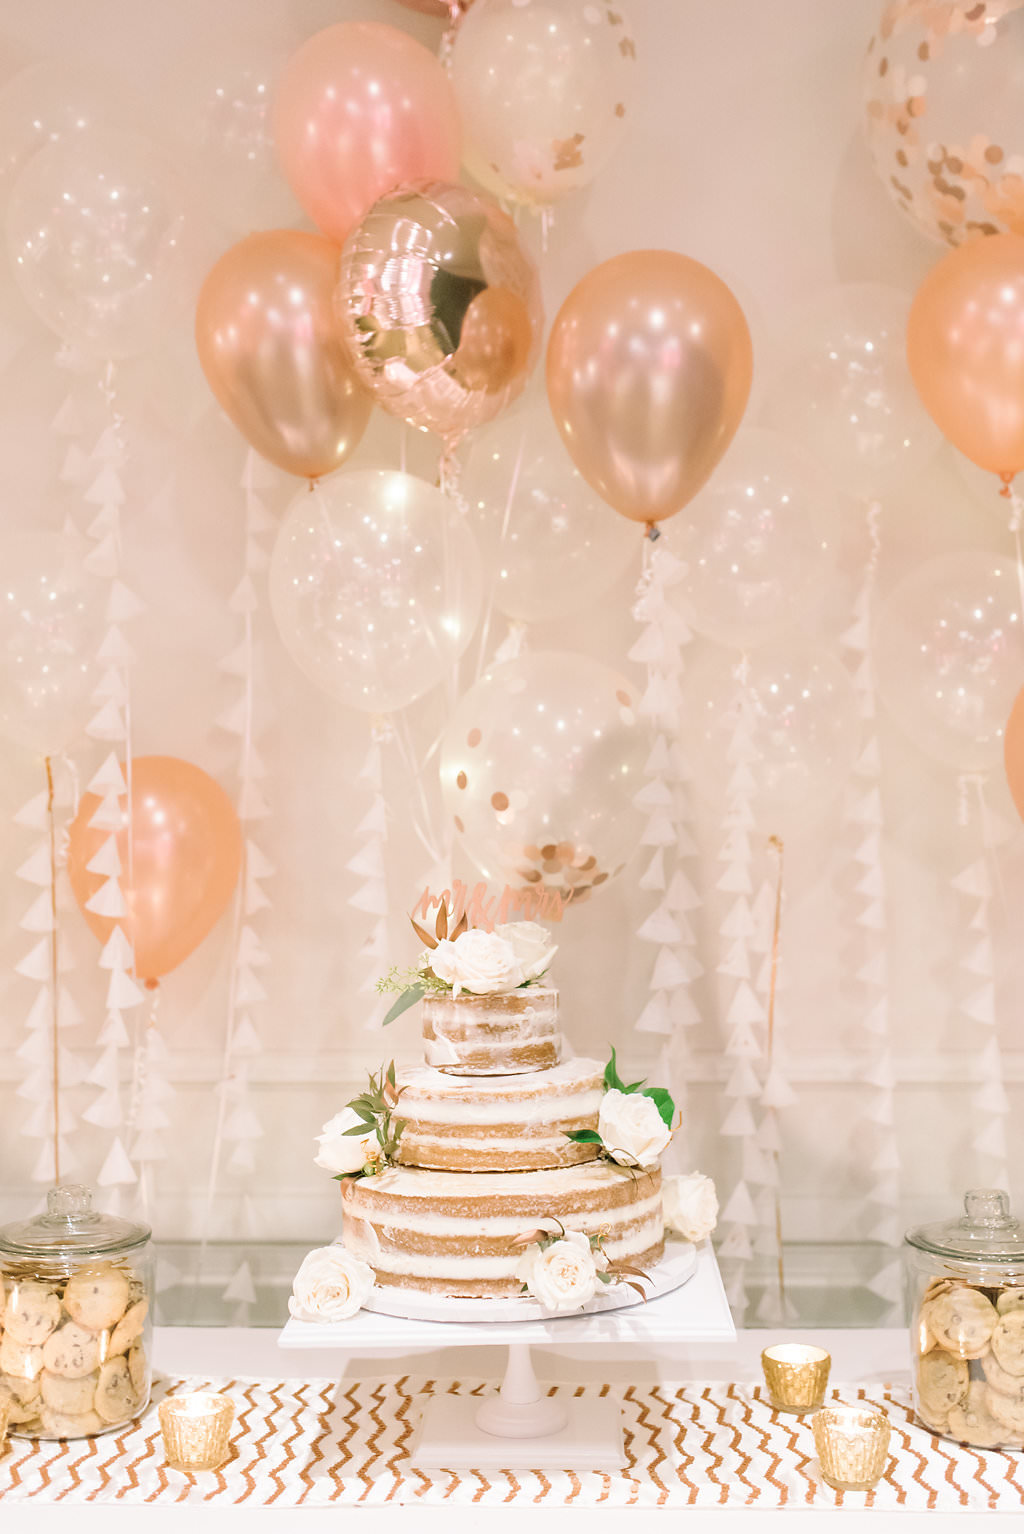 White and Copper Wedding Dessert Table with Three Tier Round Naked Frosting Cake with White ROses and Greenery, Chocolate Chip Cookies, and Rose Gold and Pink Balloons